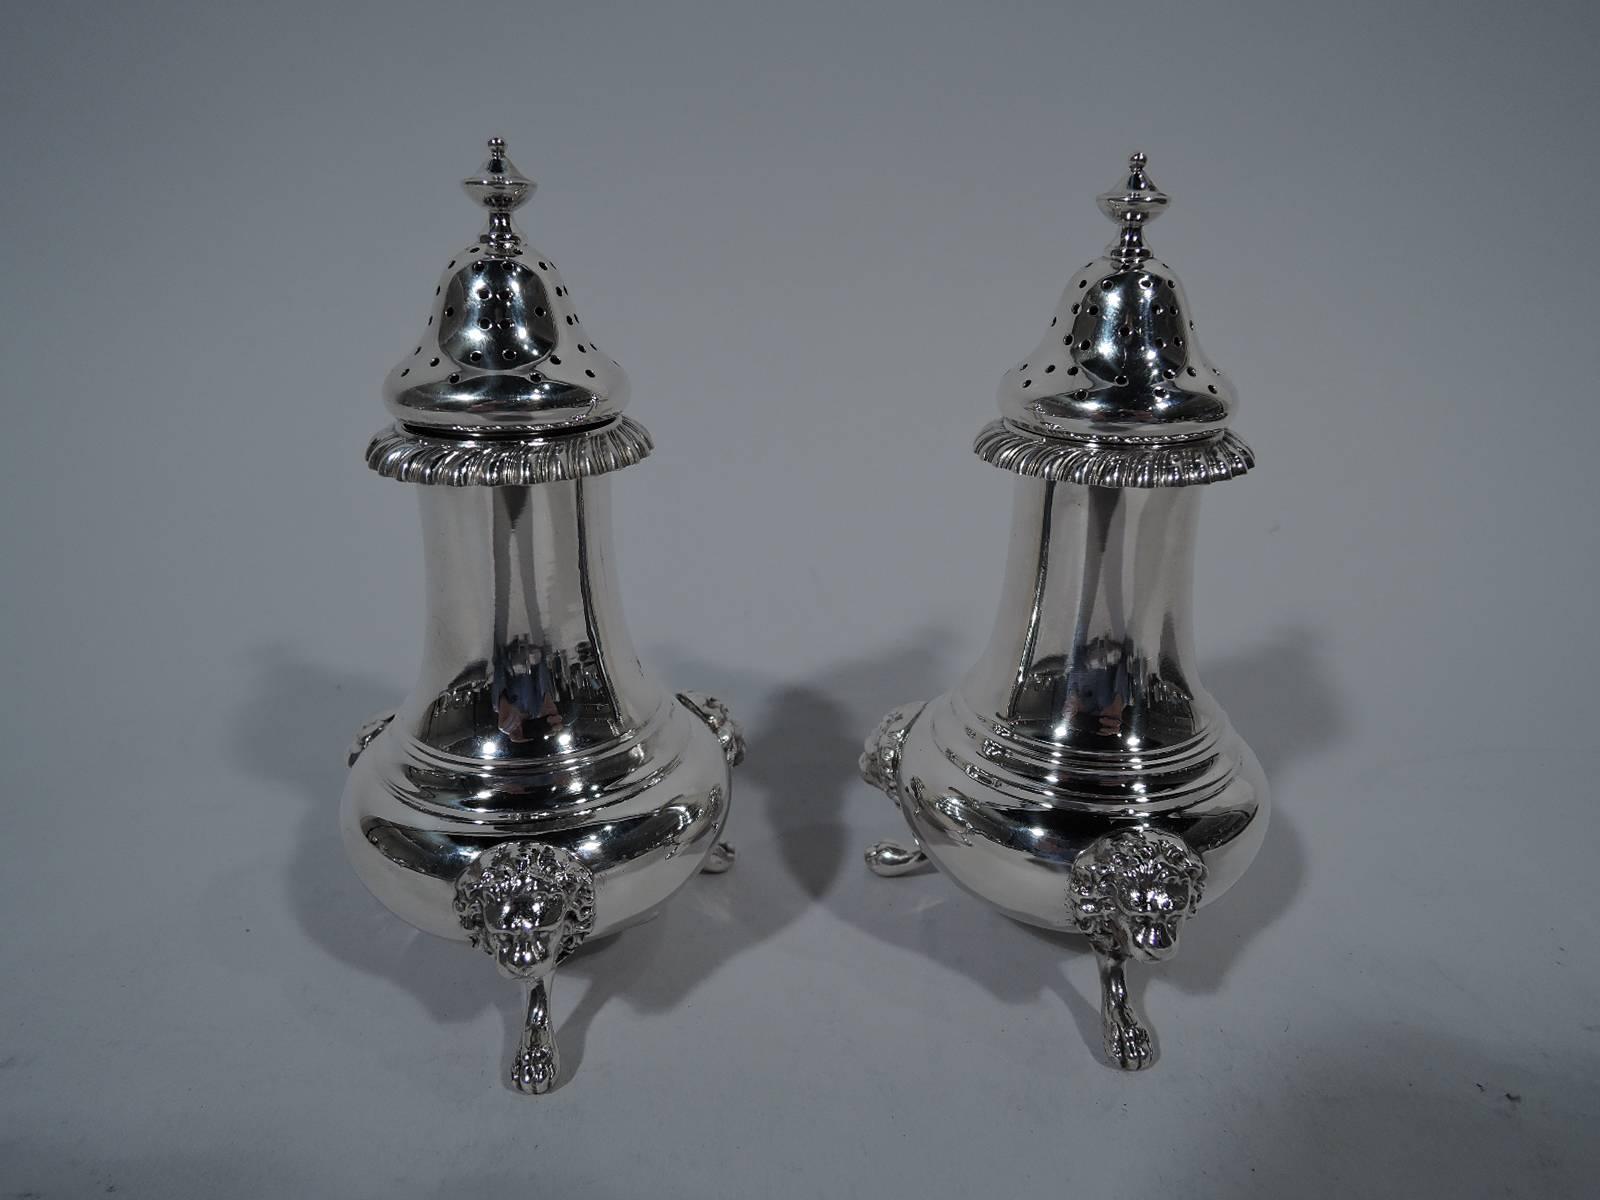 Pair of antique Neoclassical sterling silver salt & pepper shakers. Made by Gorham in Providence. Each: Baluster body supported by three lion monopodia. Turned-down and gadrooned rim and pierced domed cover with vase finial. Hallmark includes no.